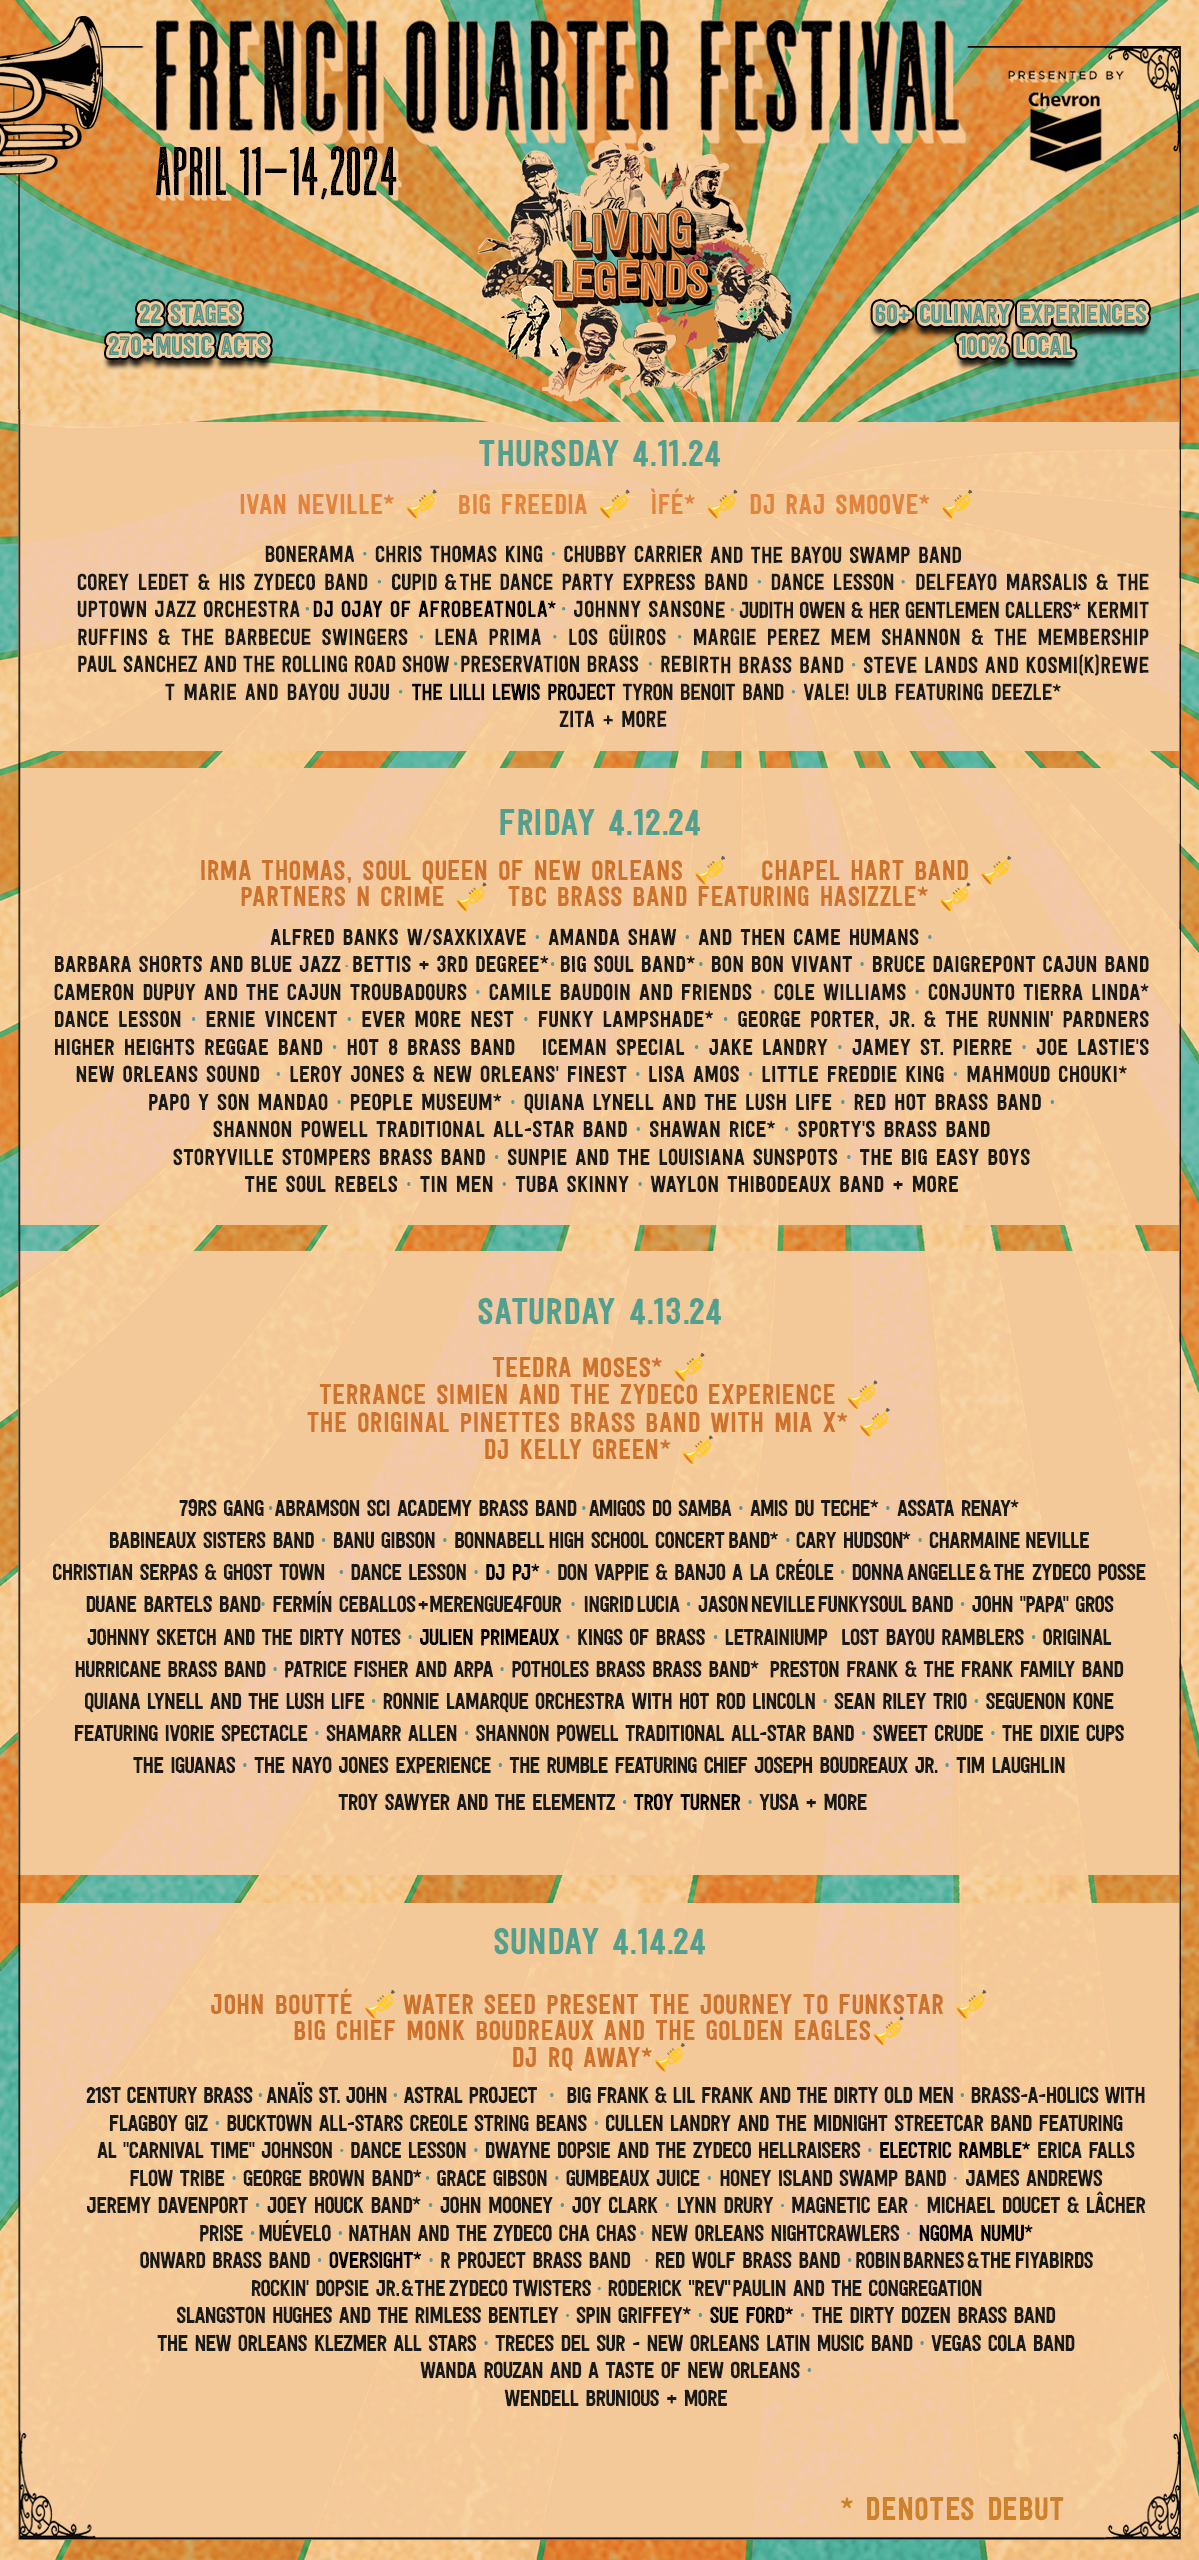 French Quarter Festival Lineup Poster with Artists - Year 2022